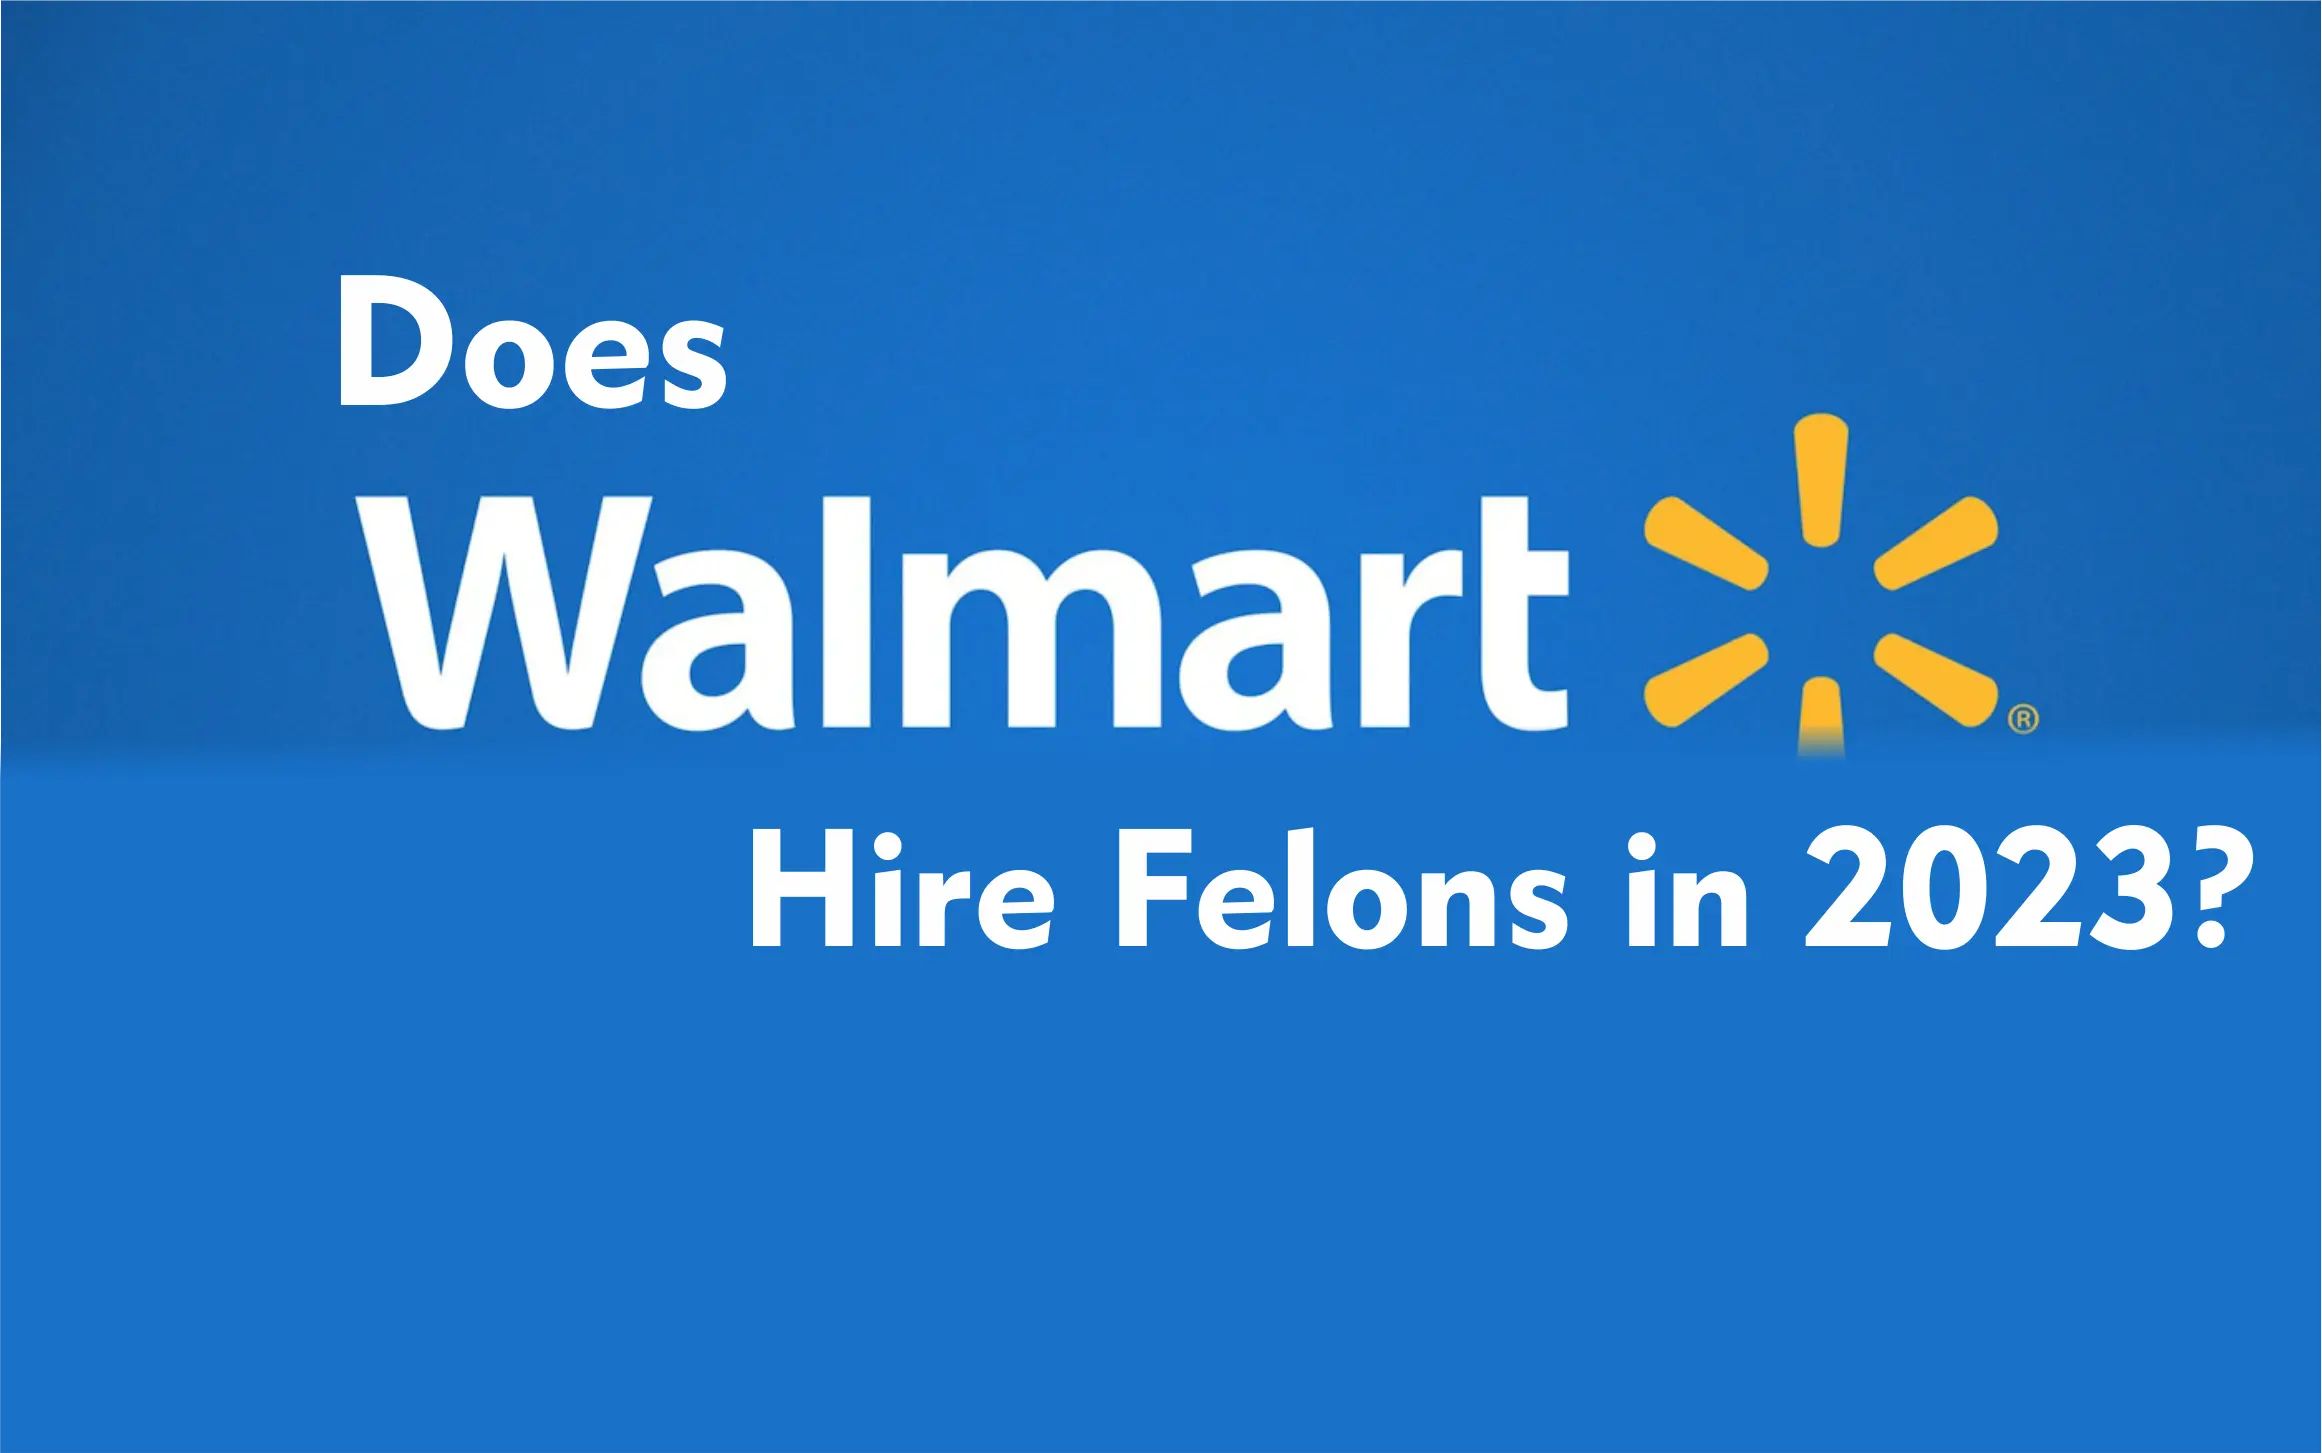 Does Walmart Hire Felons in 2023?